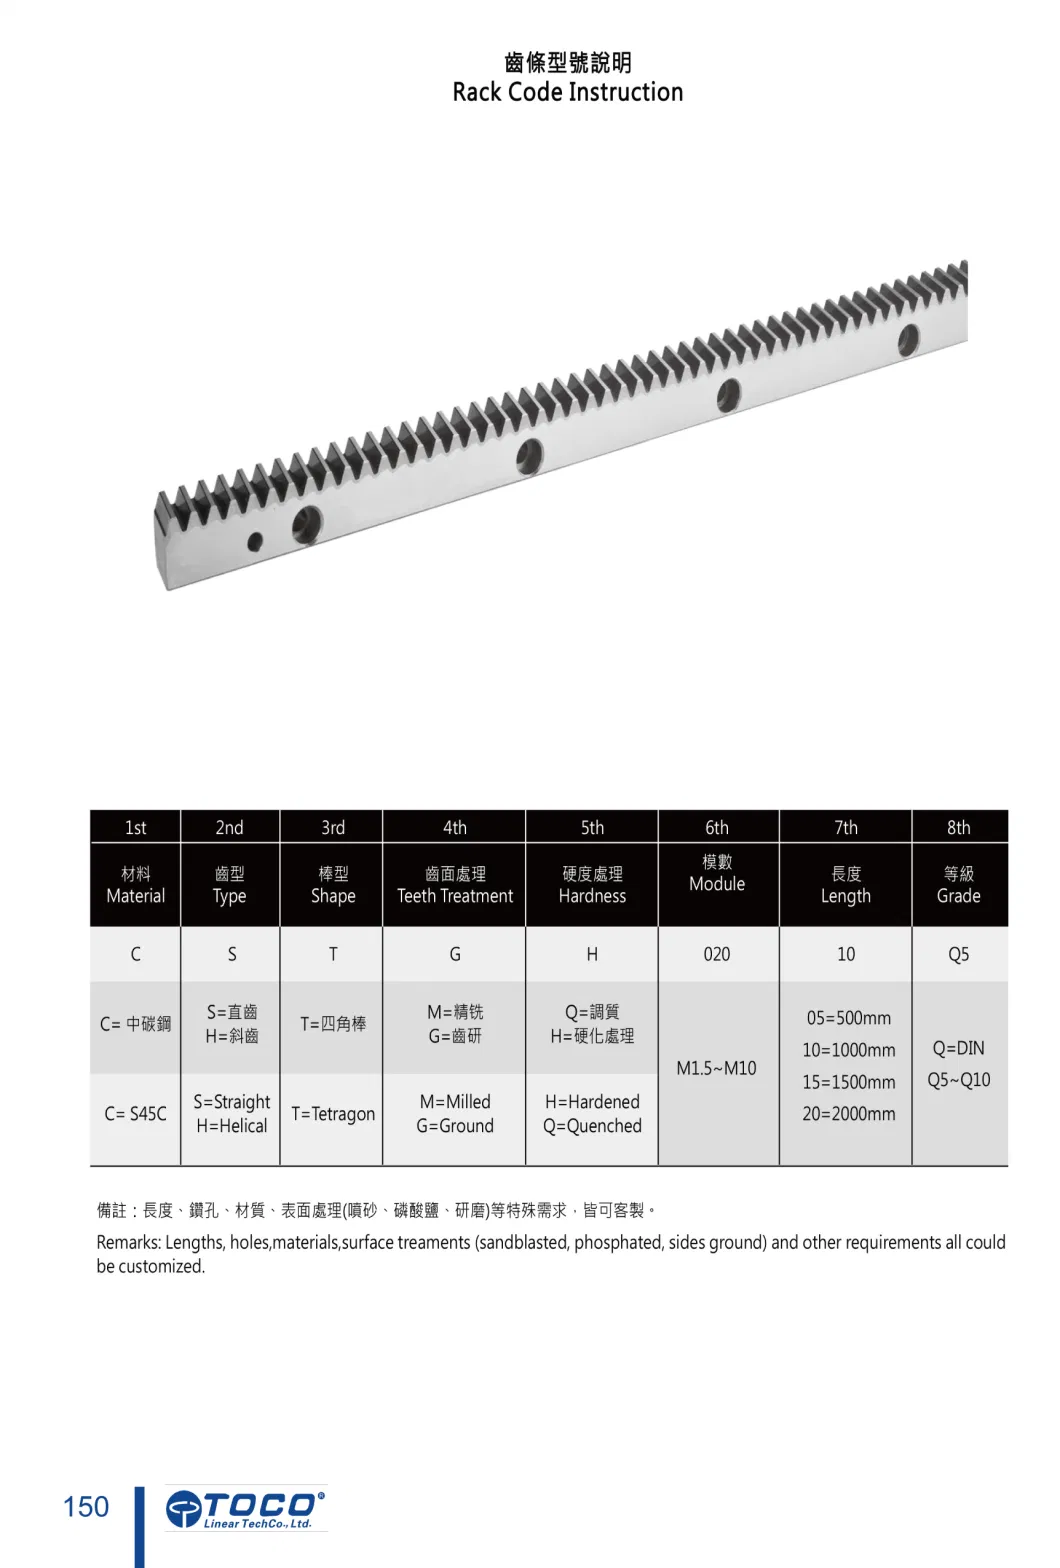 Rack and Pinion Precision Carbon Steel CNC Machinery Parts Gear Rack